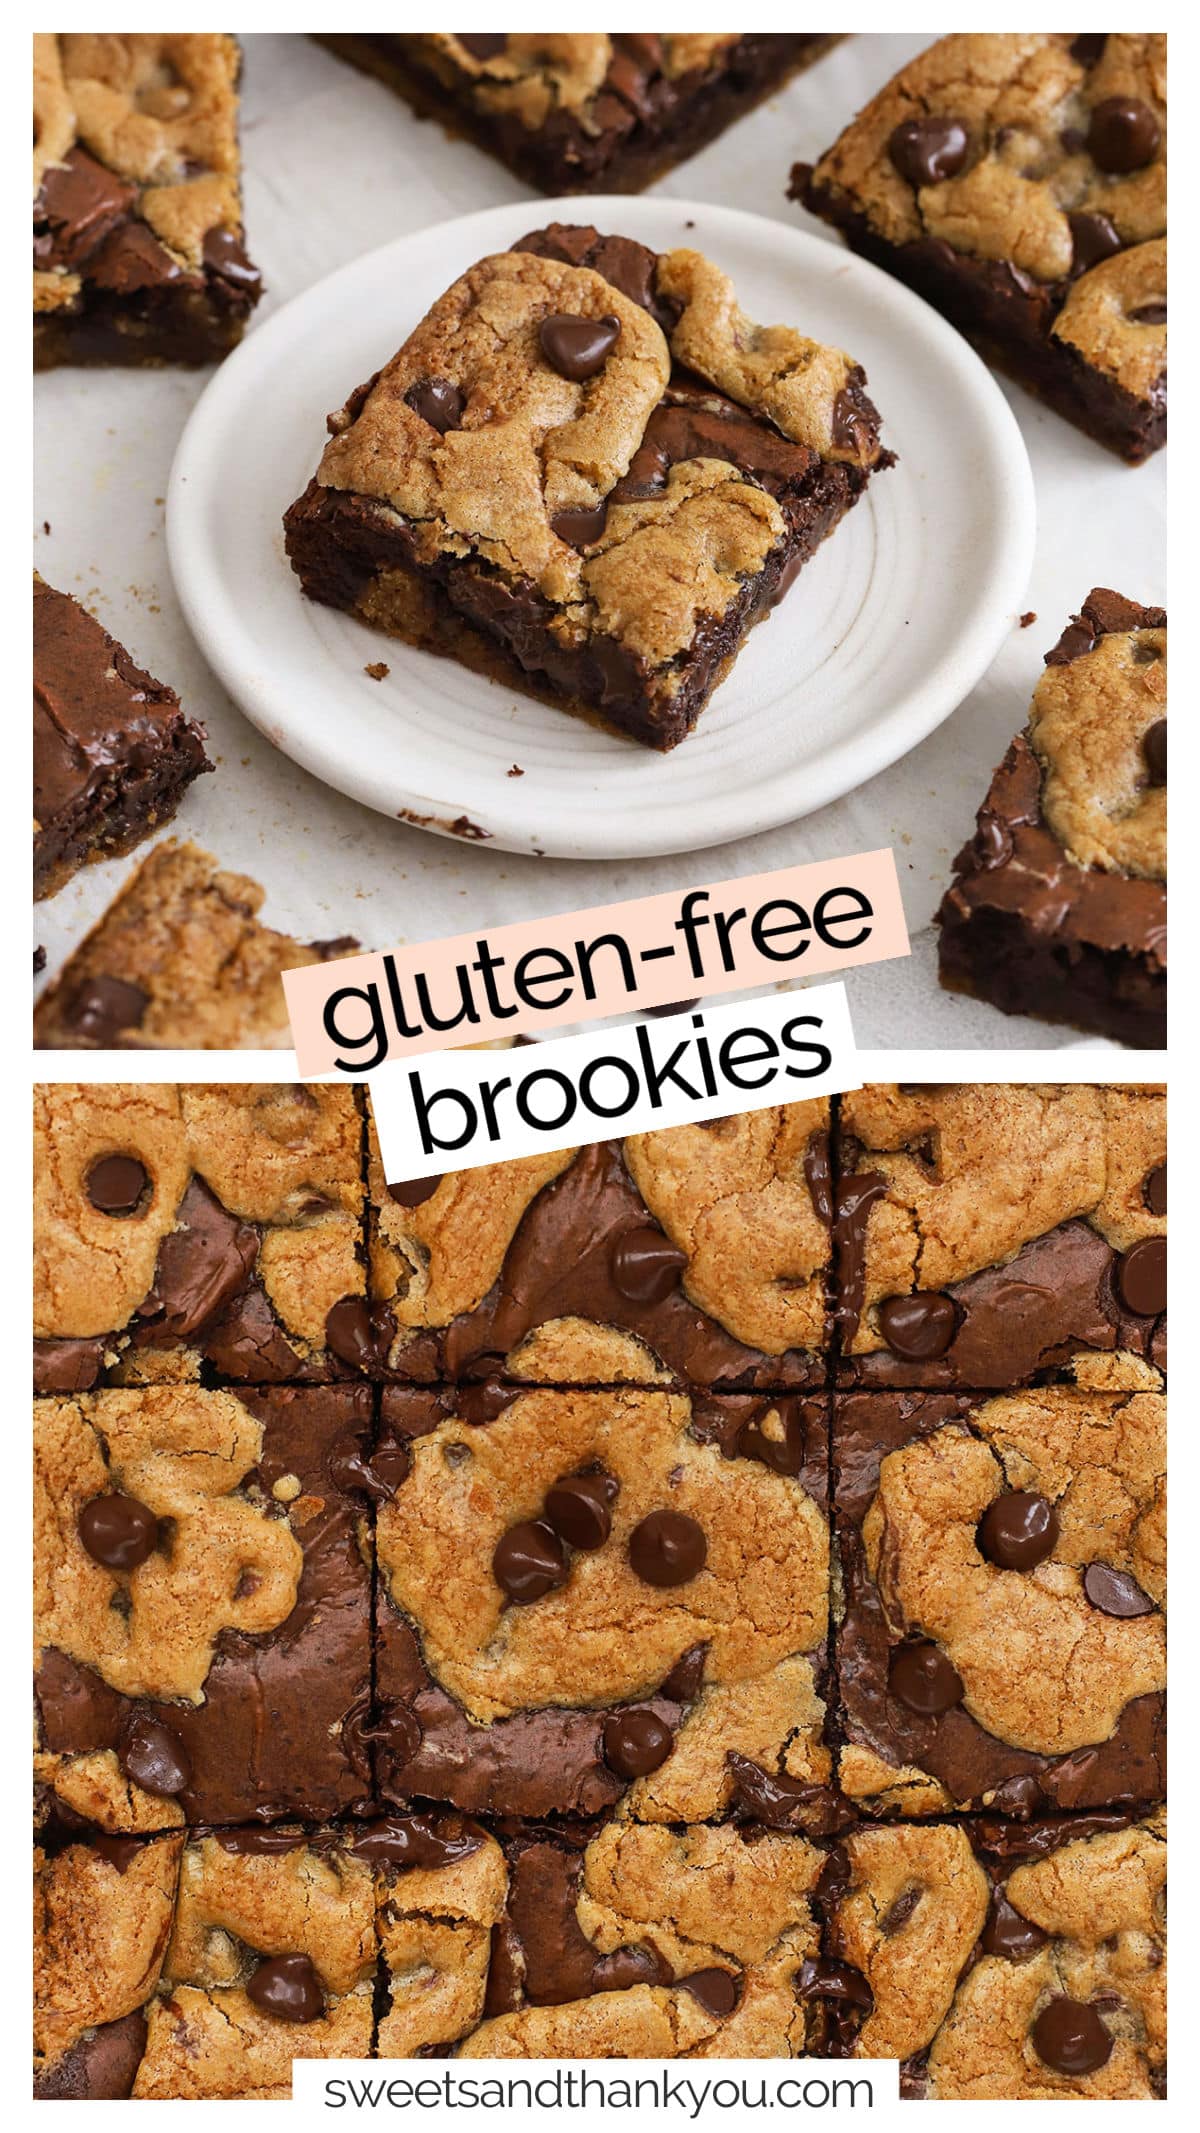 These Gluten-Free Brookies are part brownie and part cookie, for a delicious, decadent dessert that gives you the best of both worlds in every bite! We combine classic chocolate chip cookie flavor with decadent fudgy brownies for one amazing gluten-free cookie bar that's perfect for sharing. Enjoy it on its own, or turn it into an ice cream sundae for an even more indulgent treat!